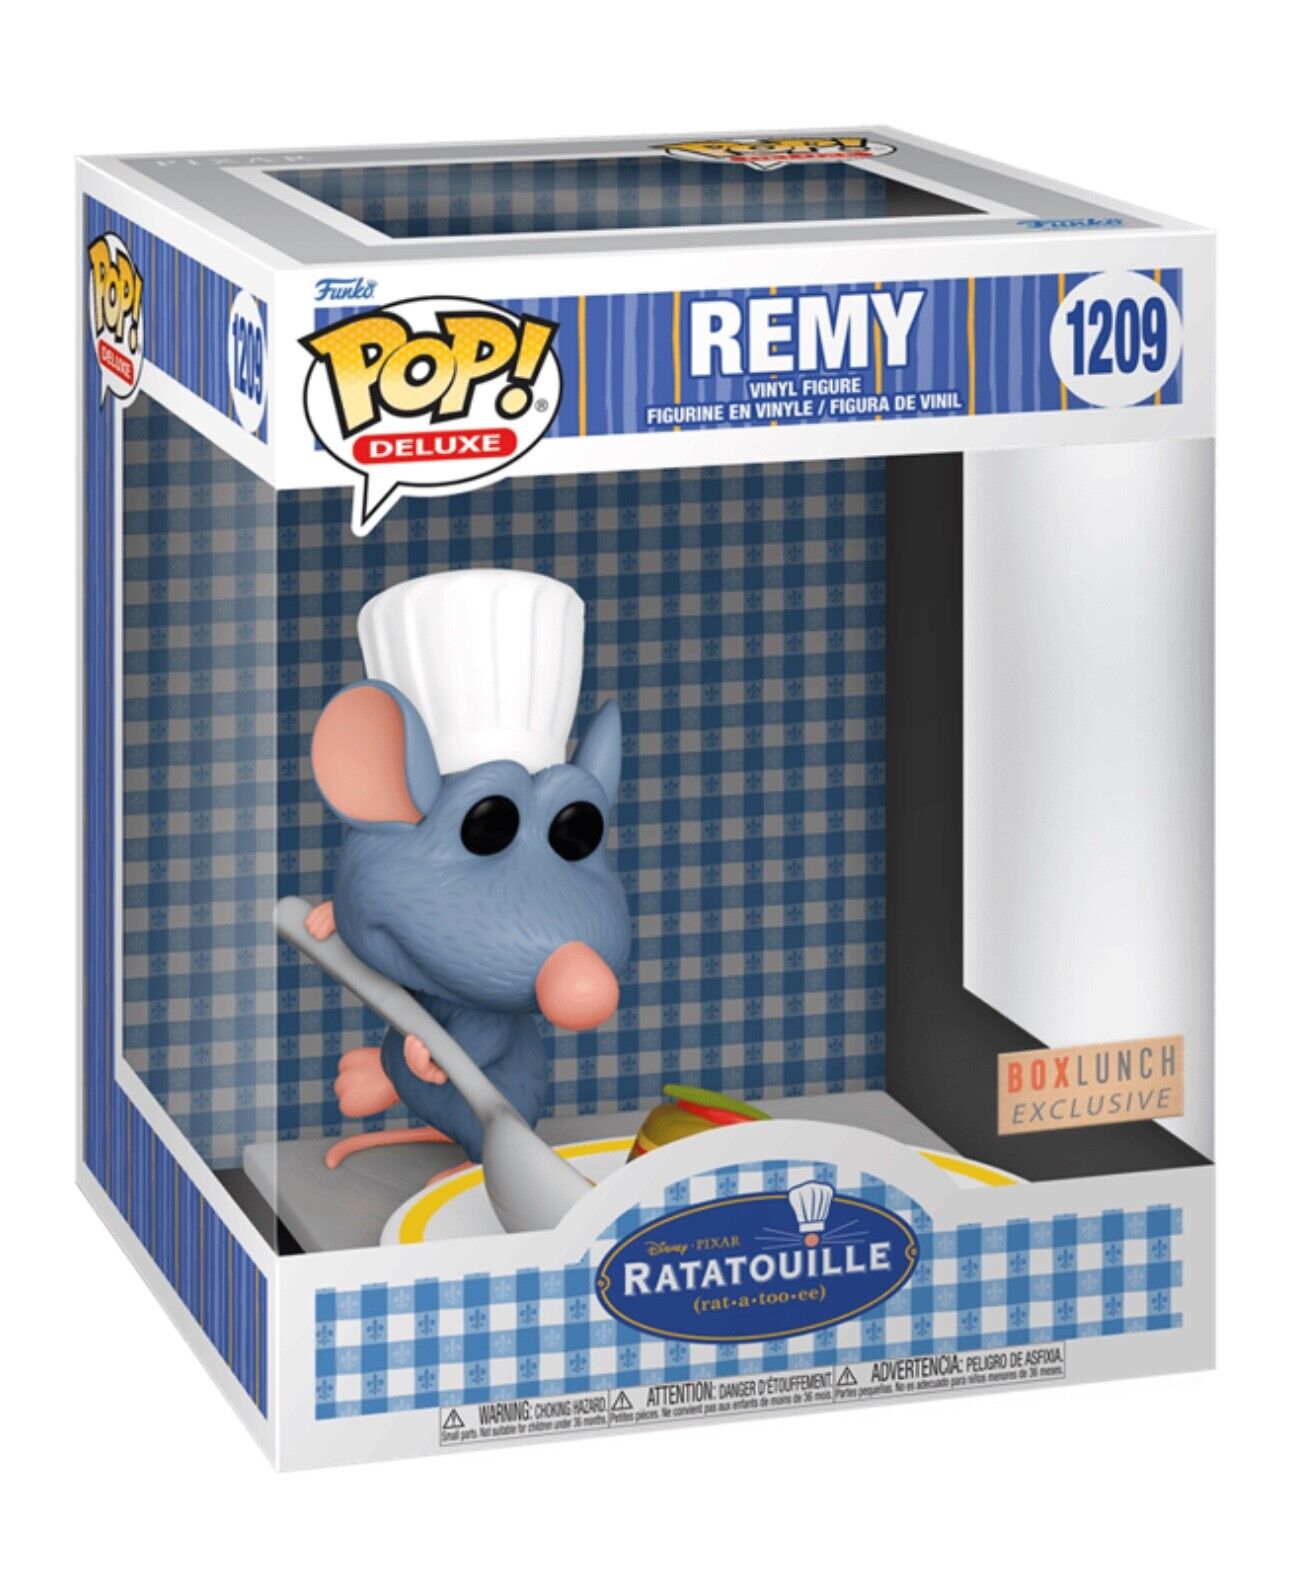 Funko Pop! Deluxe: Pixar - Remy - Box Lunch (BL) (Exclusive) #1209